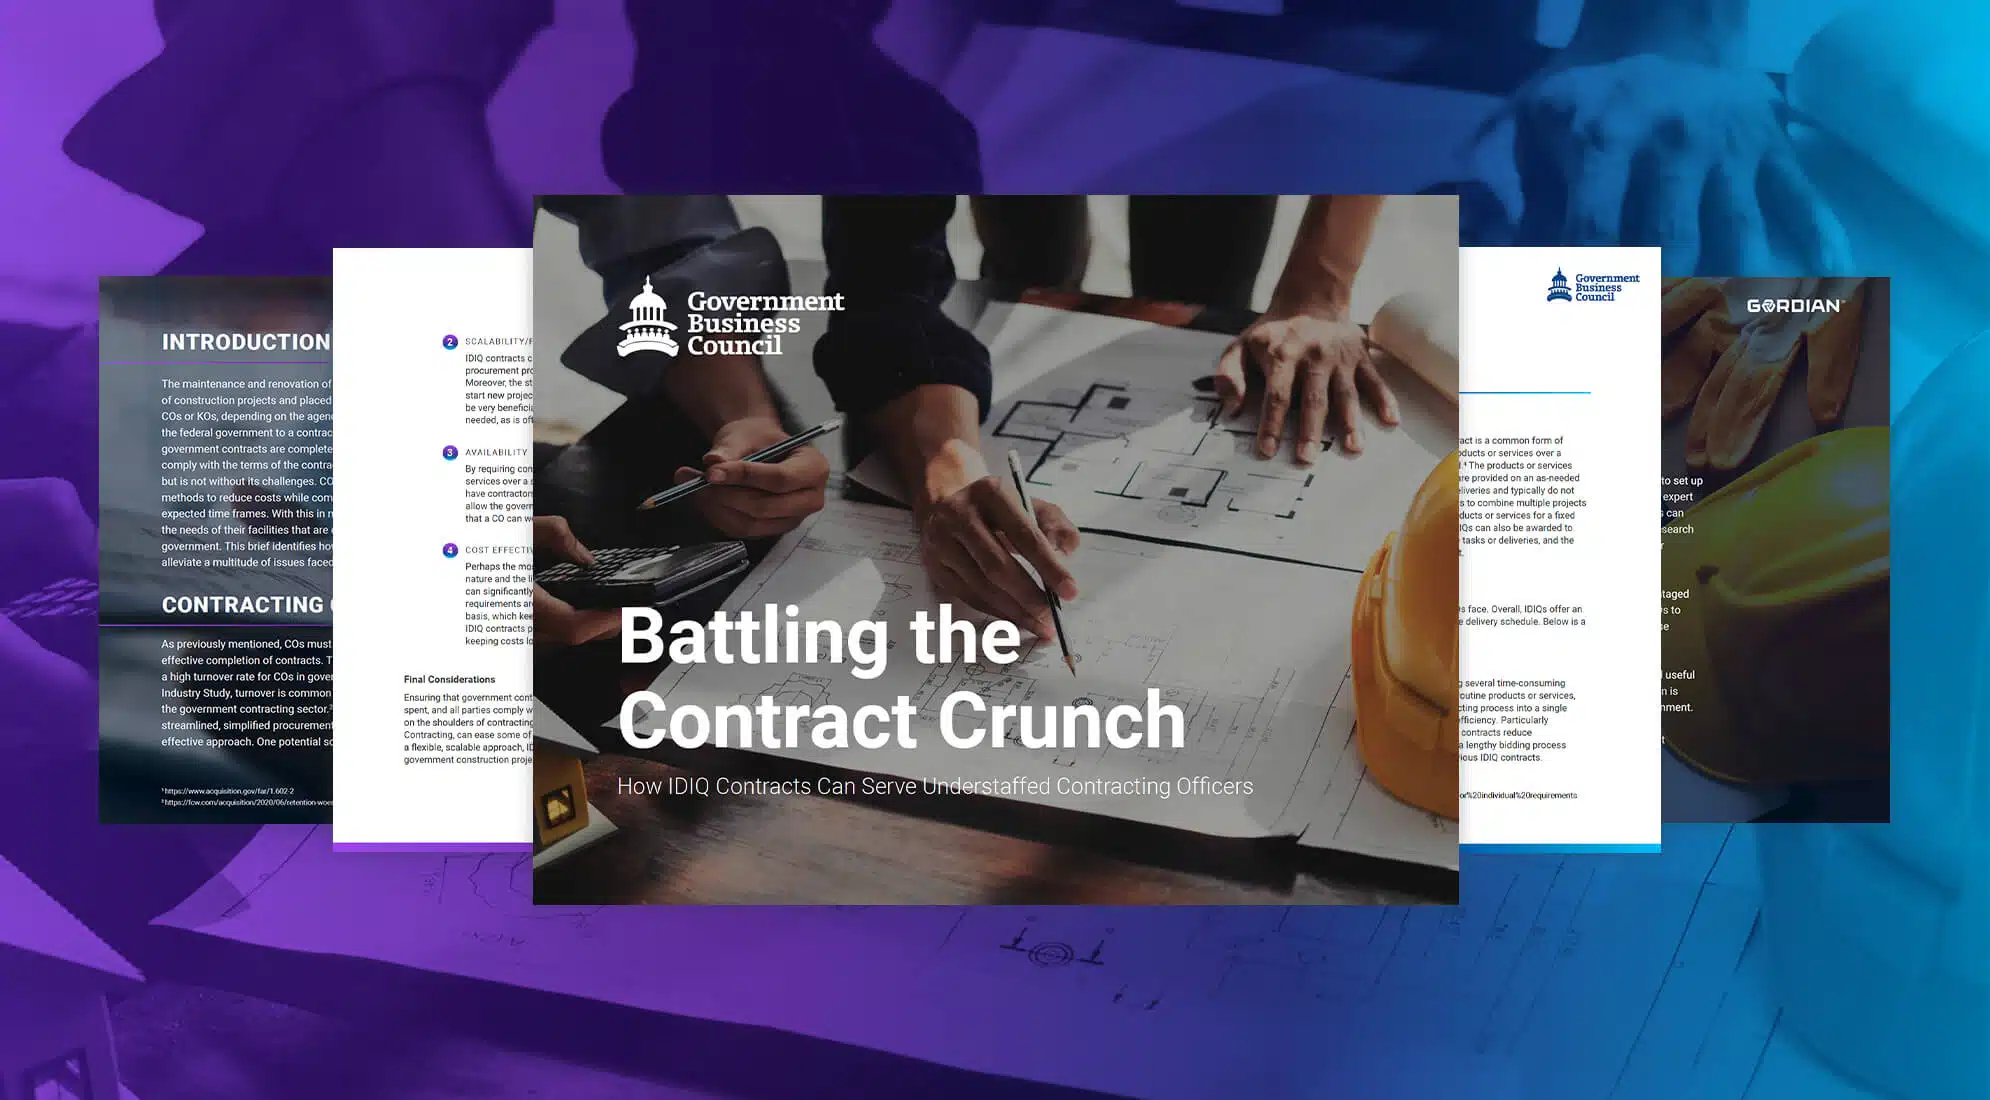 How IDIQ Contracts Can Serve Federal Contracting Offices 3